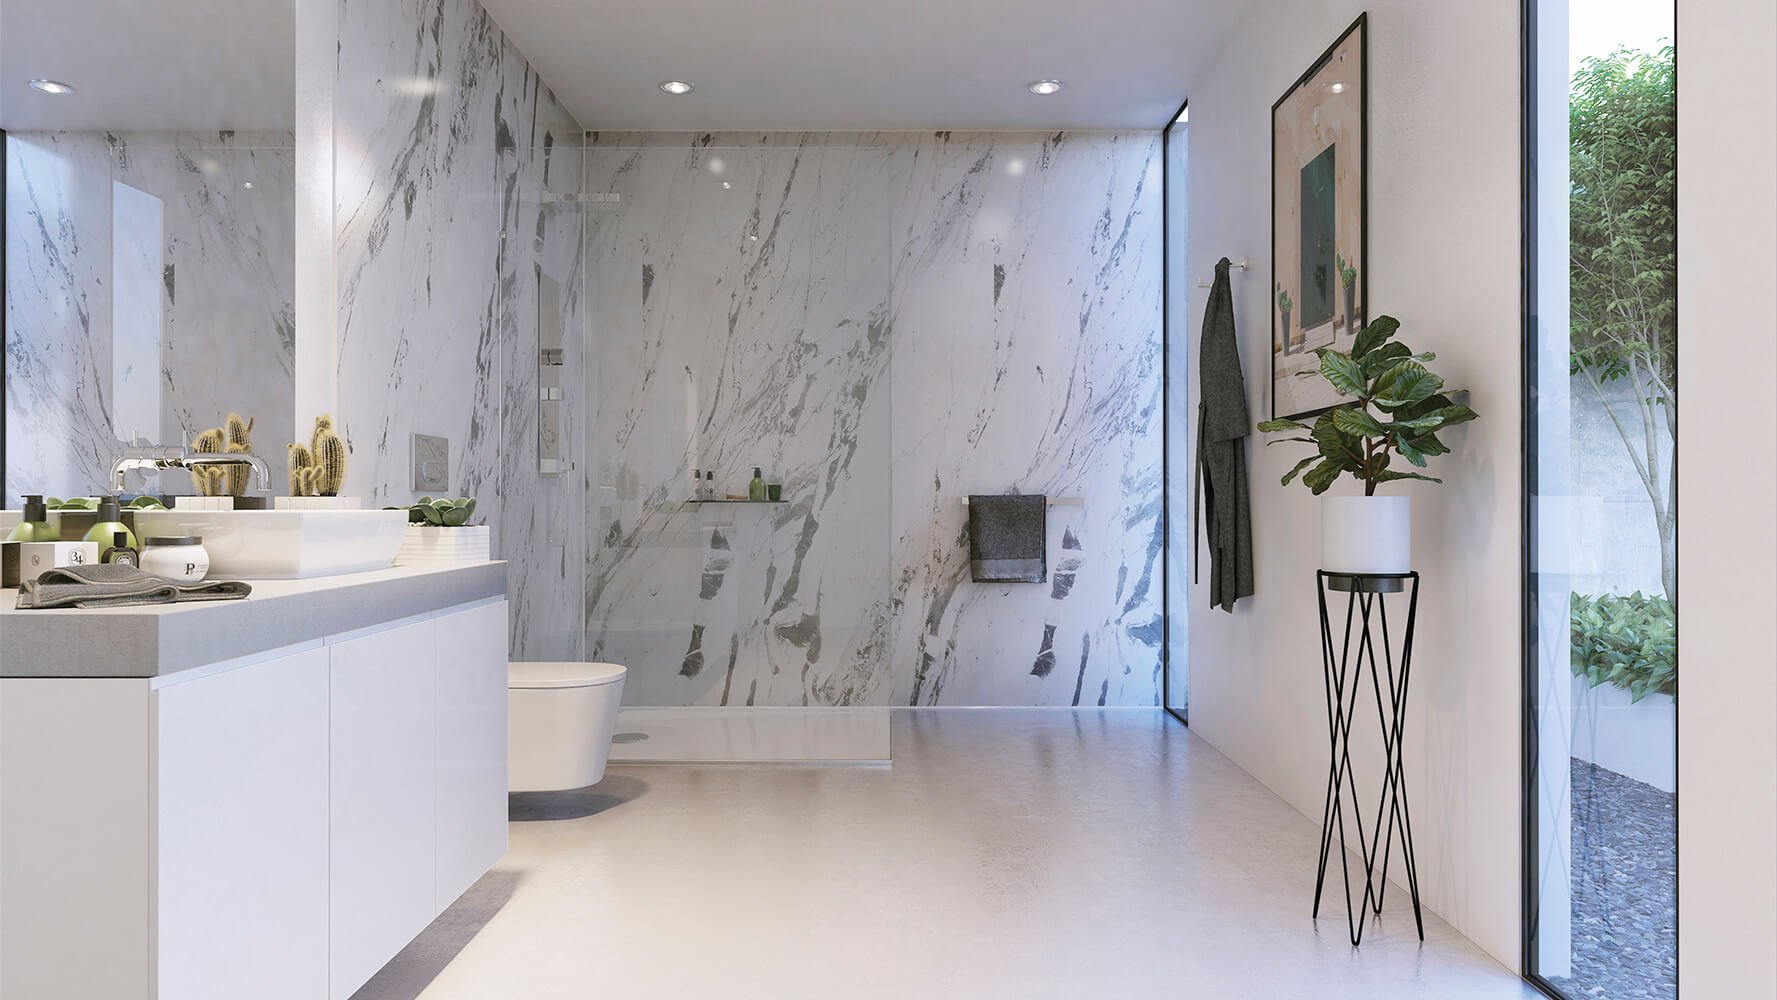 The Biggest Bathroom Trend For 2019 by interior styist and lifestyle blogger Maxine Brady from www.welovehomeblog.com